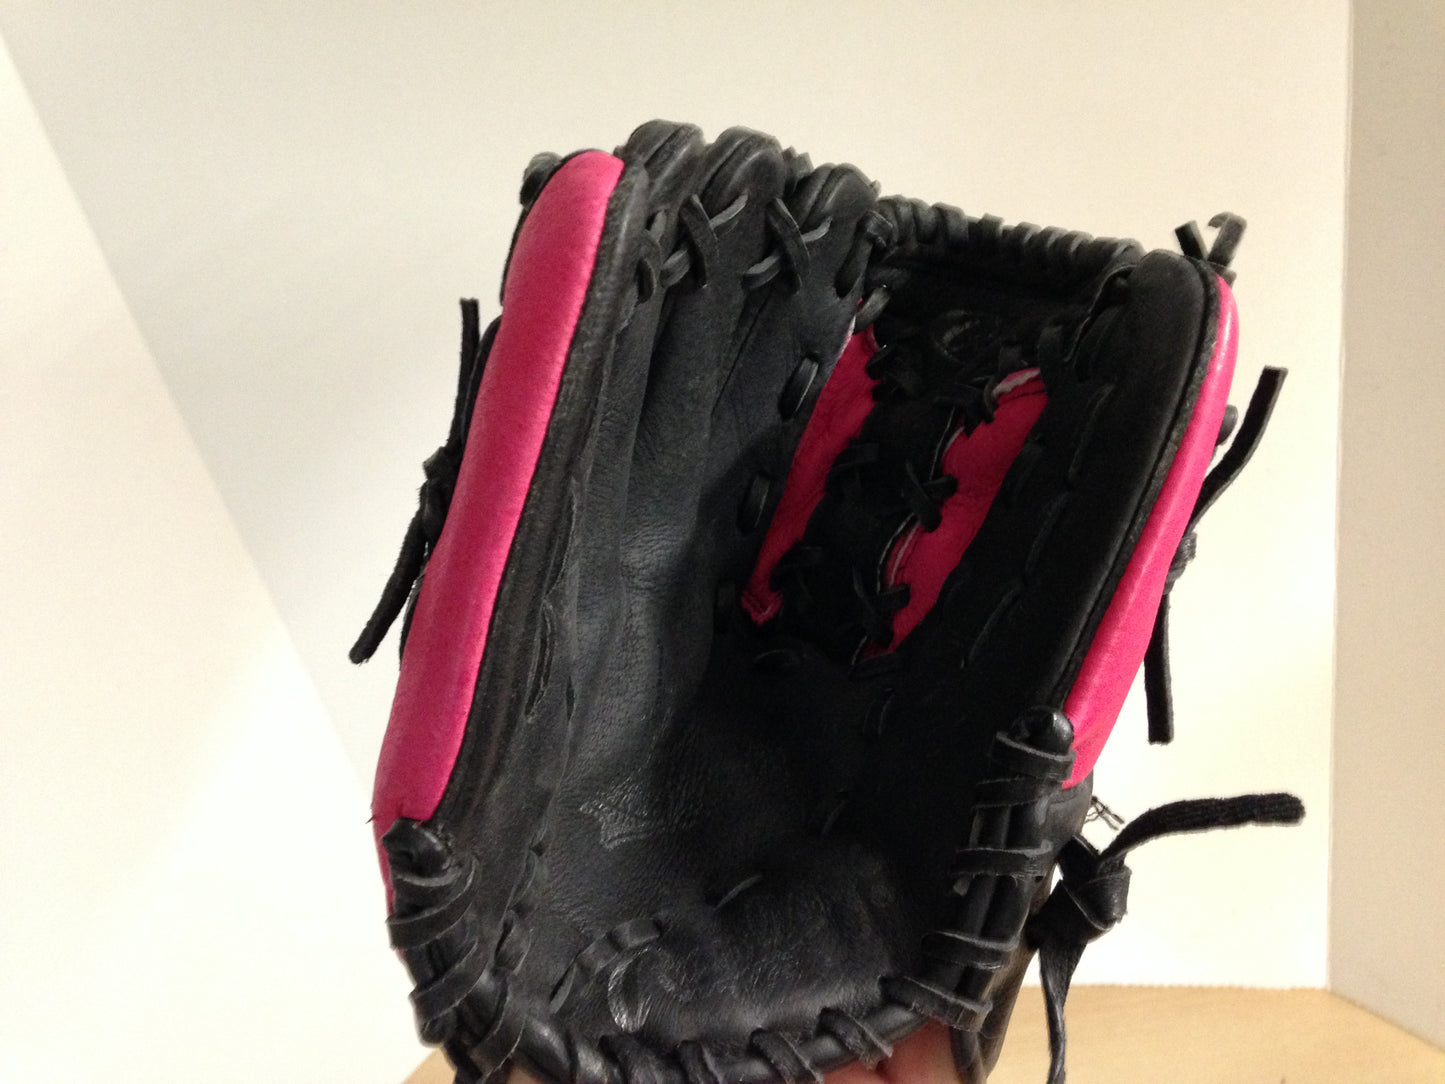 Baseball Glove Adult Size 11 inch Rawlings Black Pink Leather Fits on RIGHT Hand